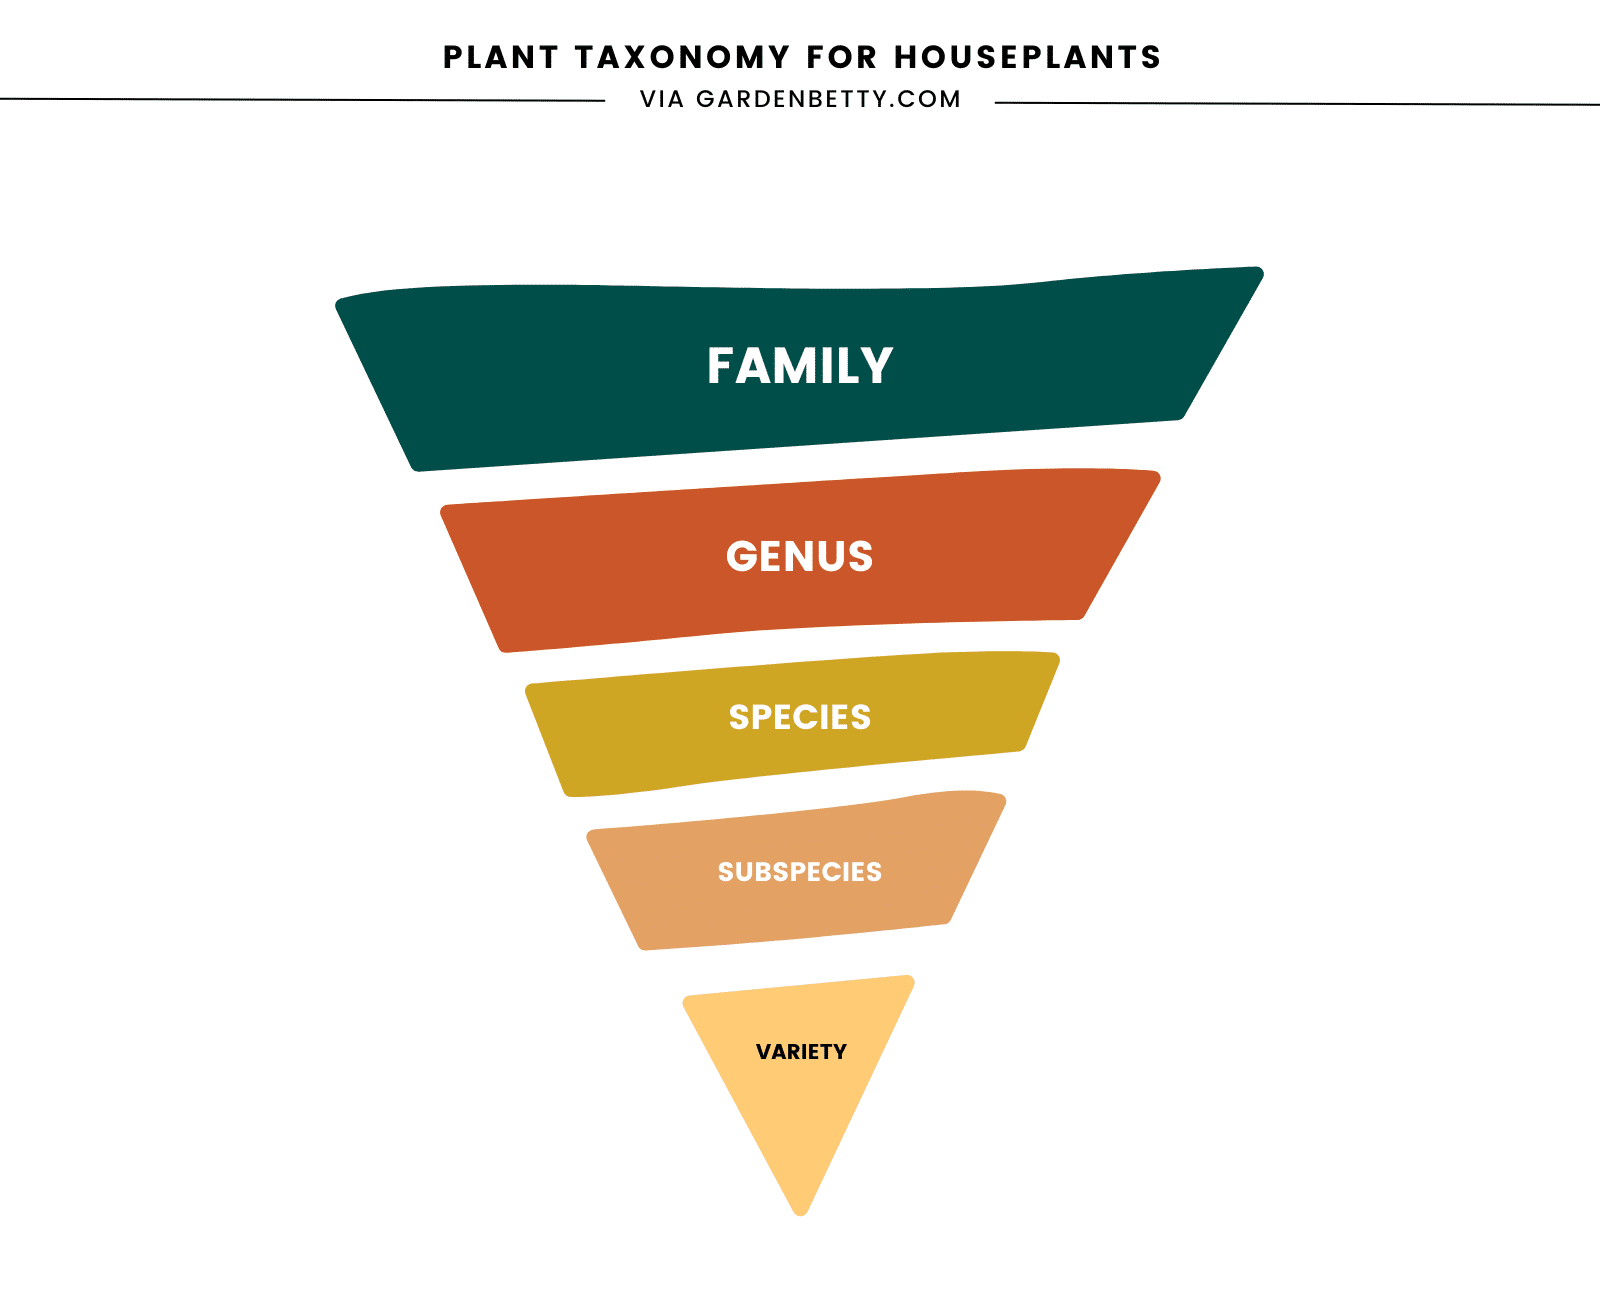 Illustration showing plant taxonomy in an inverted triangle from family down to variety